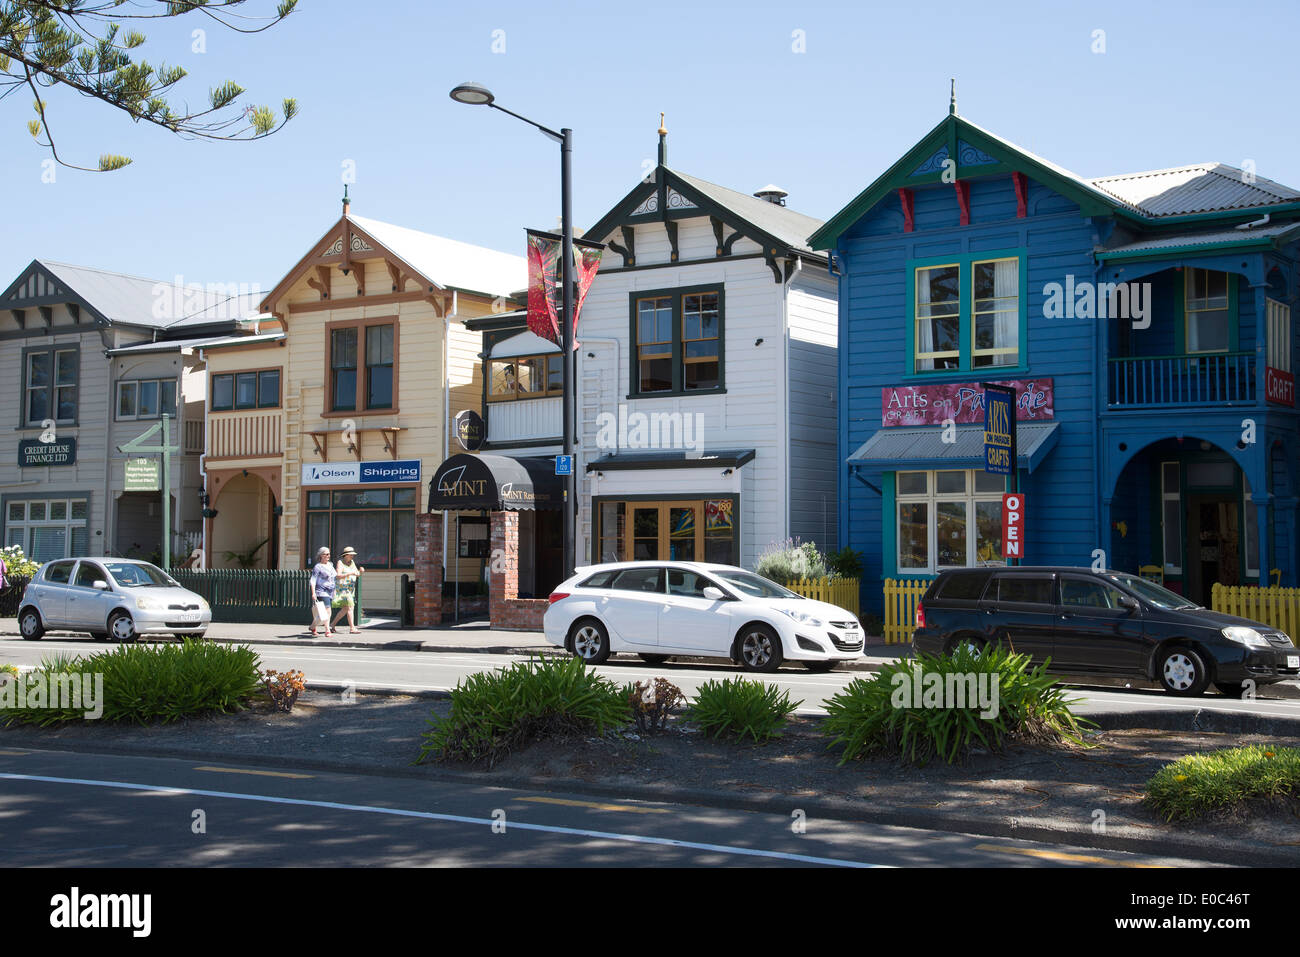 Napier town centre buildings Hawkes Bay region on the North island New Zealand Stock Photo